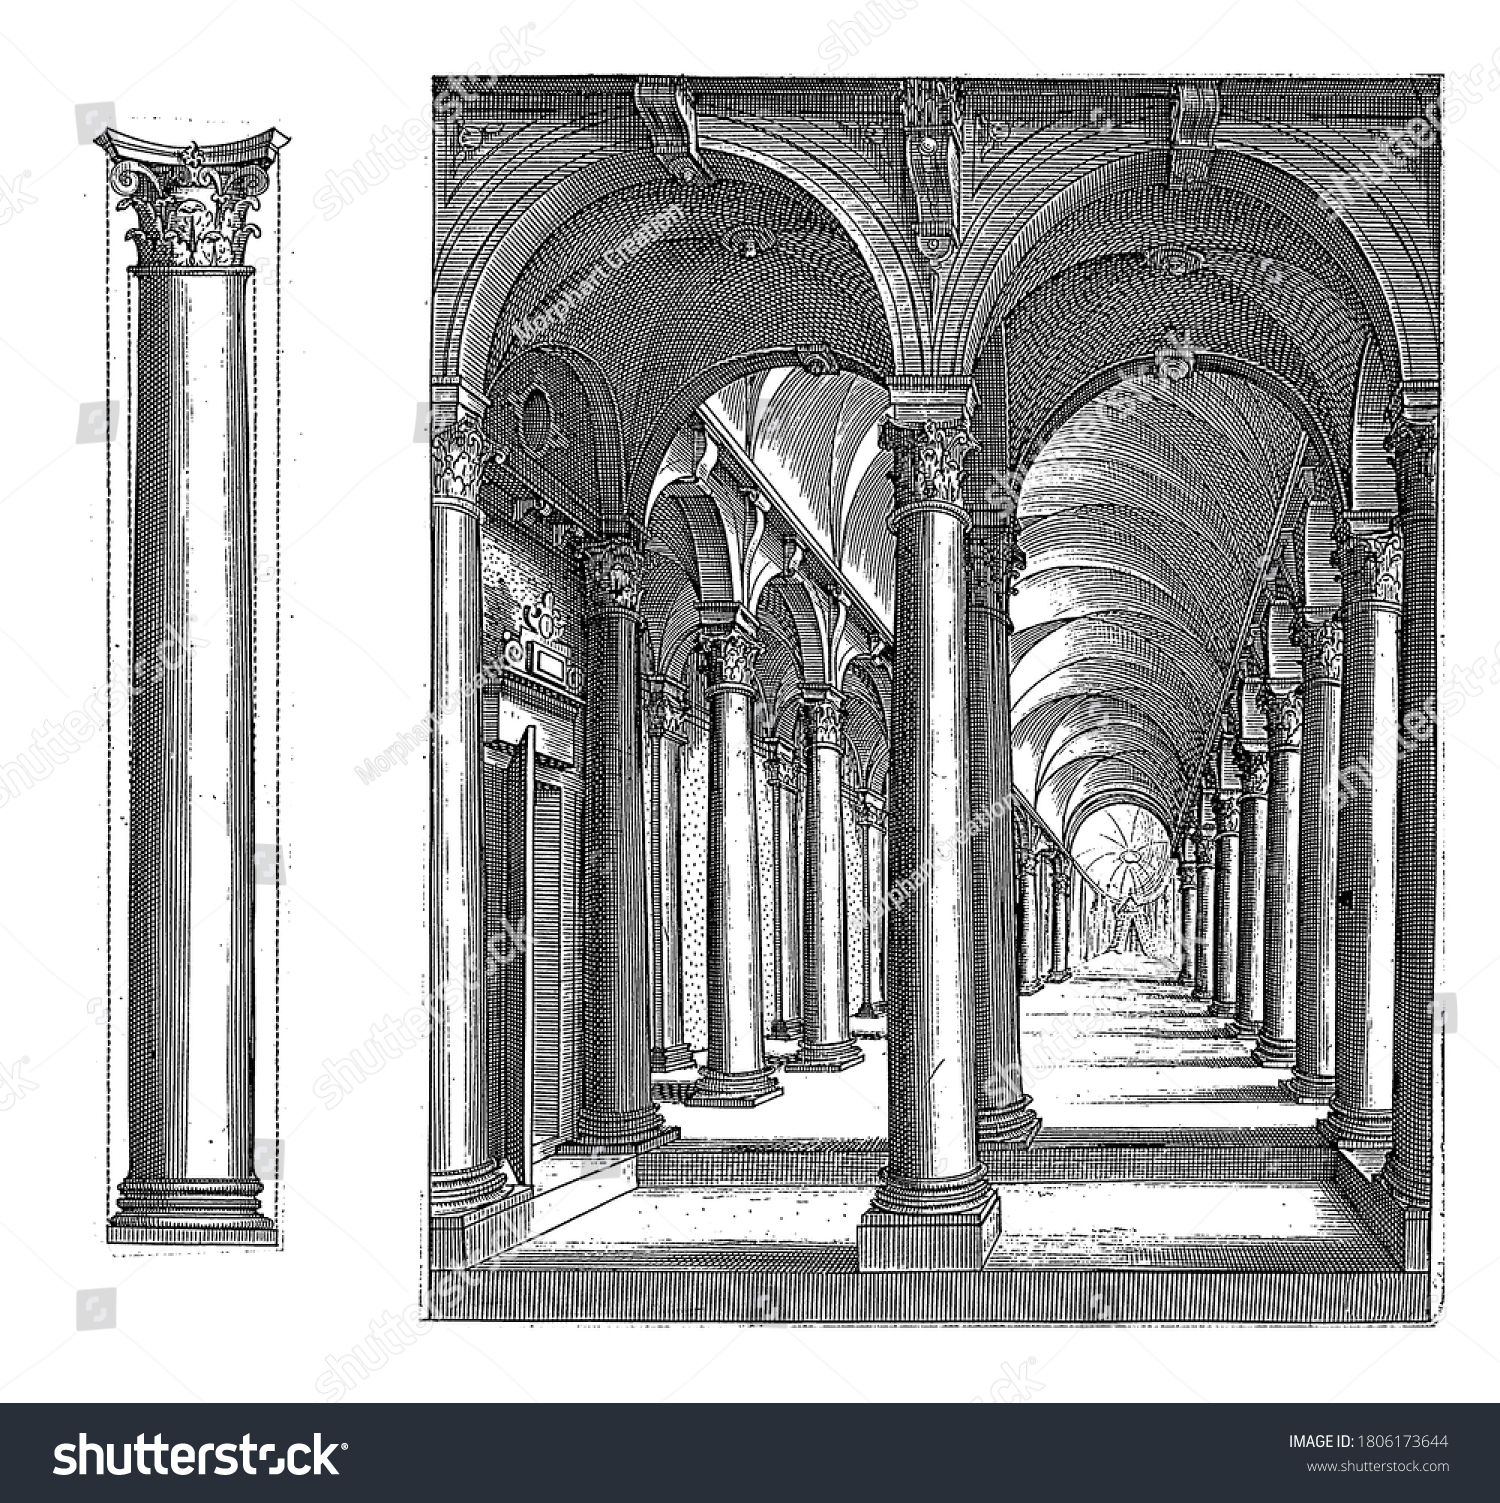 Column of the Corinthian order and a portico, Column of the Corinthian order and a portico with columns of the Corinthian building order, vintage engraving. #1806173644